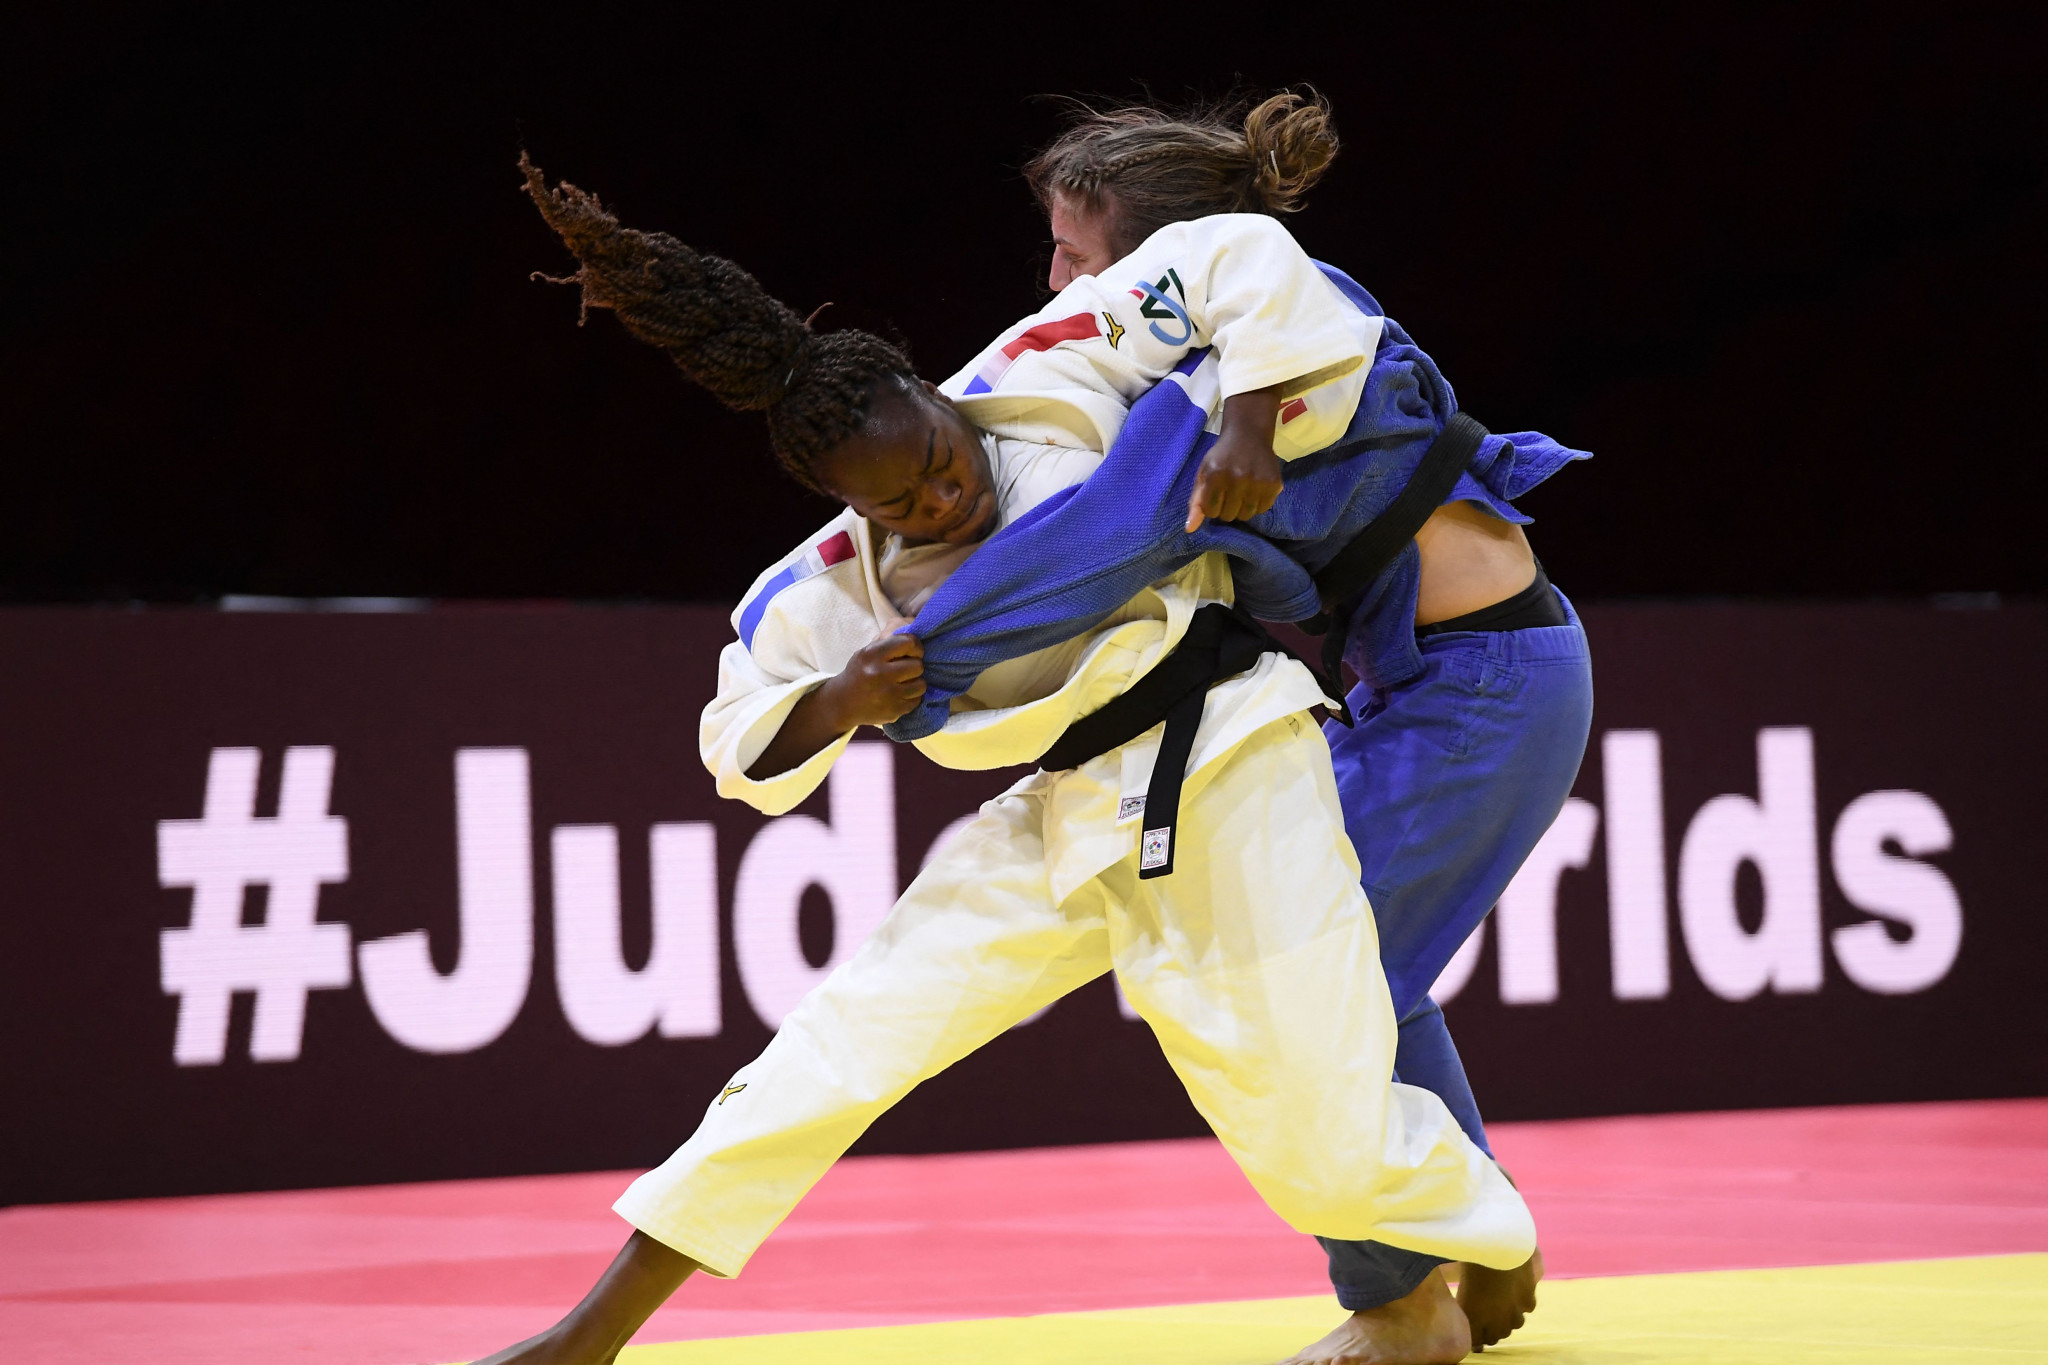 Clarisse Agbegnenou claimed victory over Andreja Leški with an ippon - her fifth of the tournament ©Getty Images